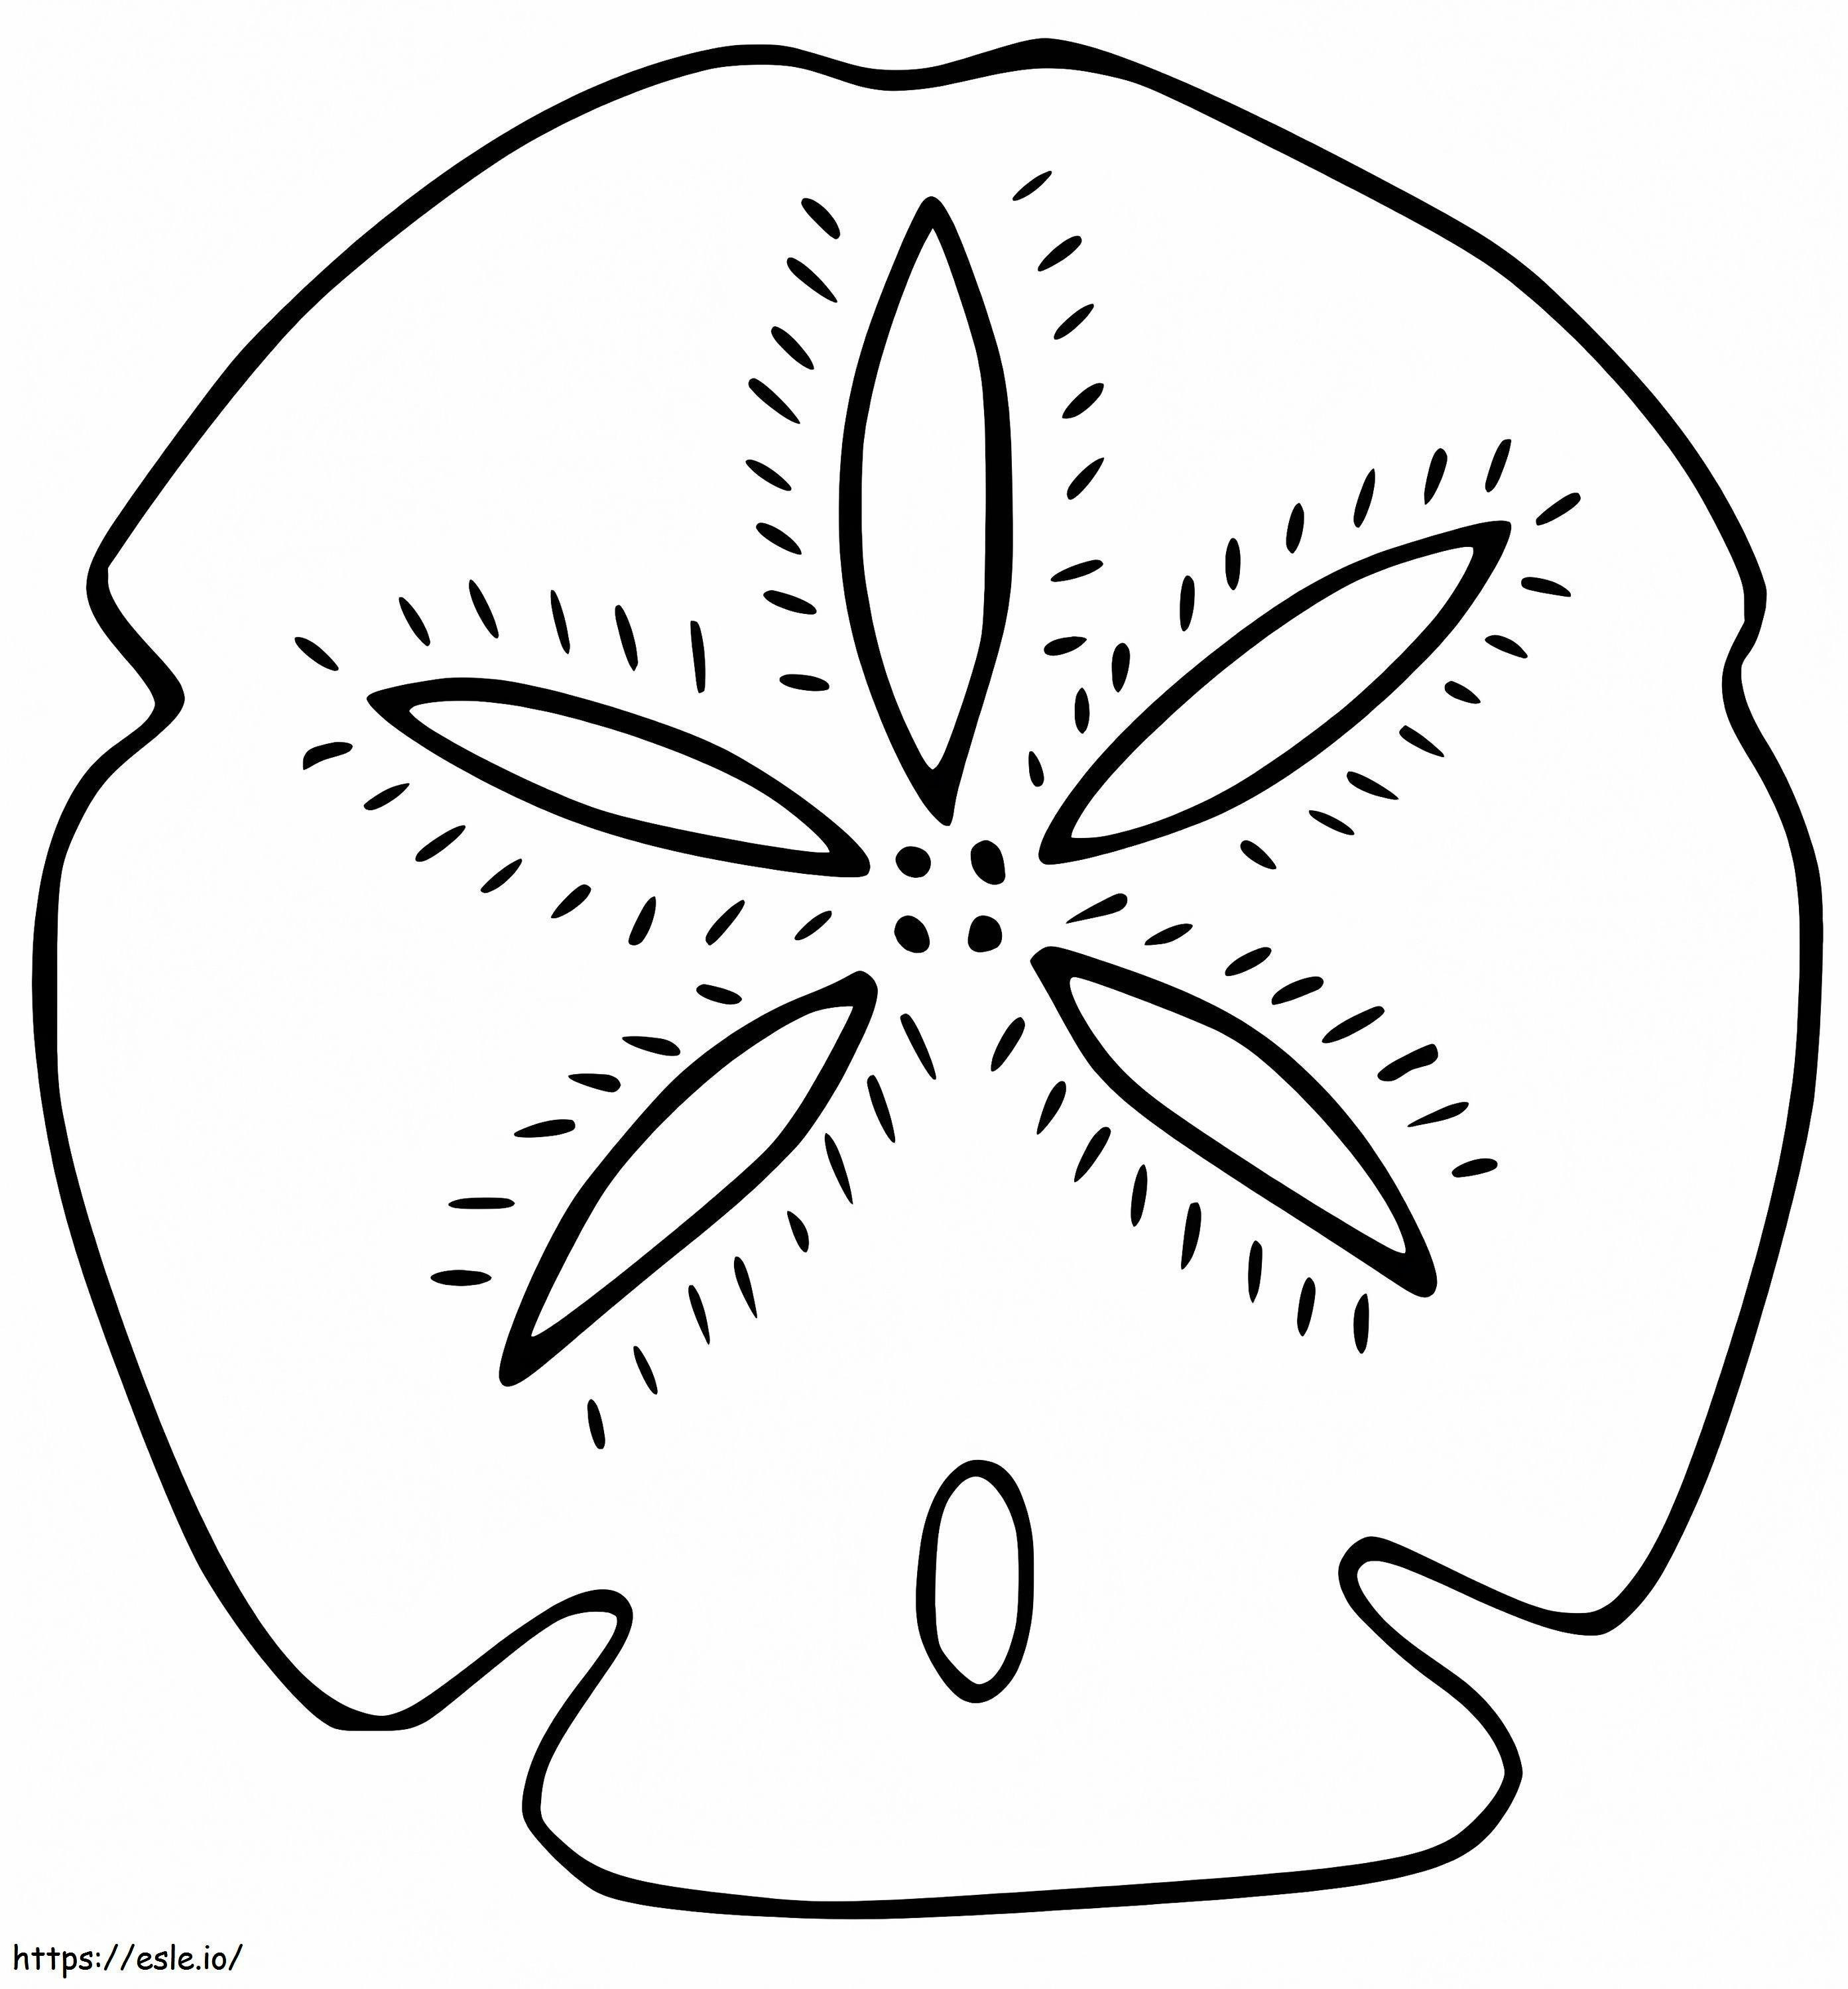 Sand Dollar 4 coloring page